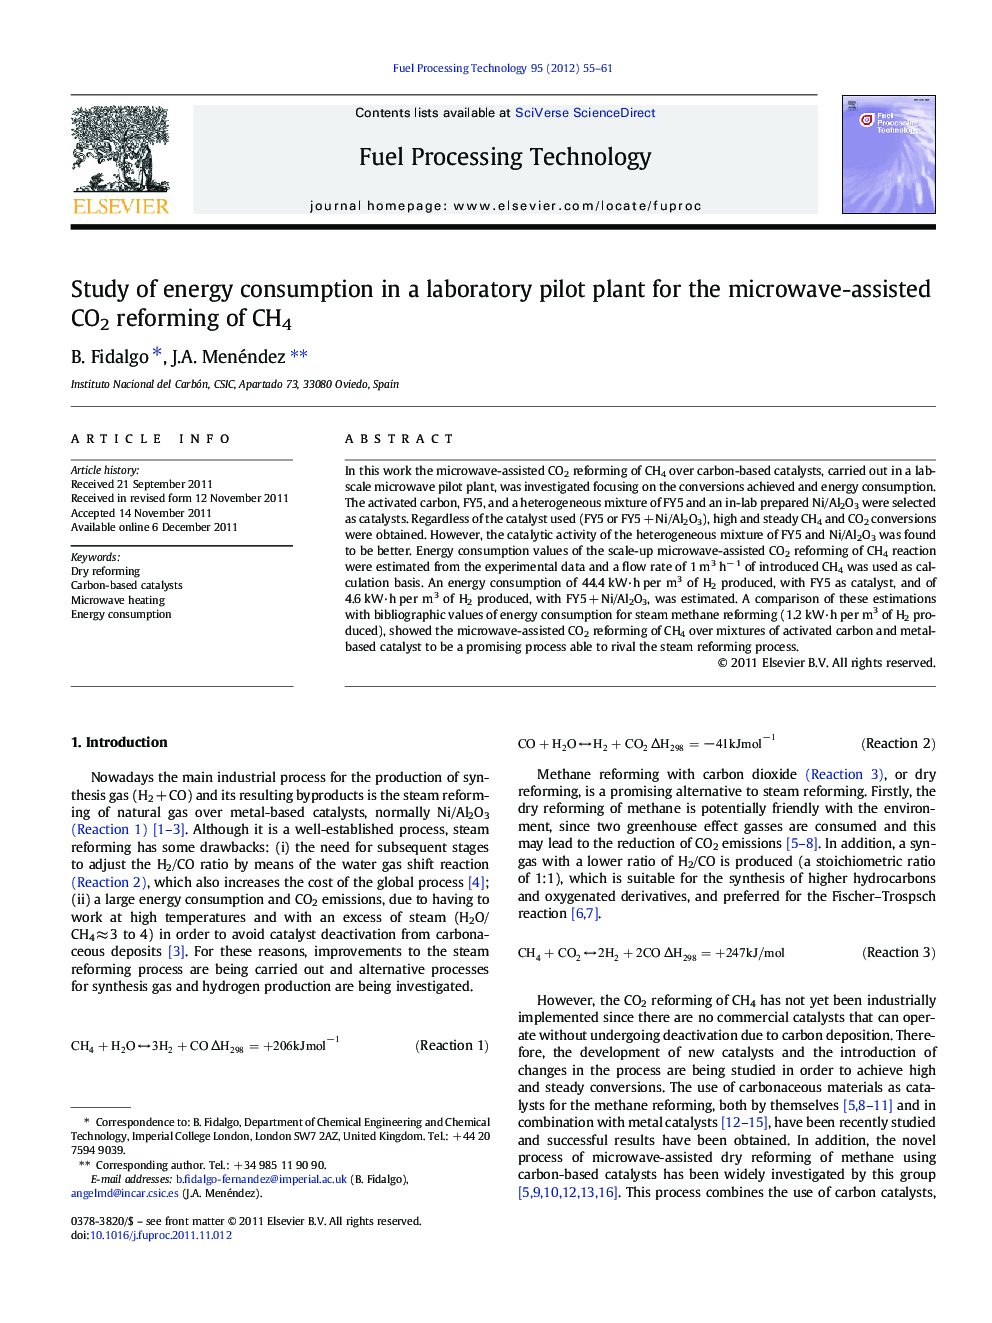 Study of energy consumption in a laboratory pilot plant for the microwave-assisted CO2 reforming of CH4